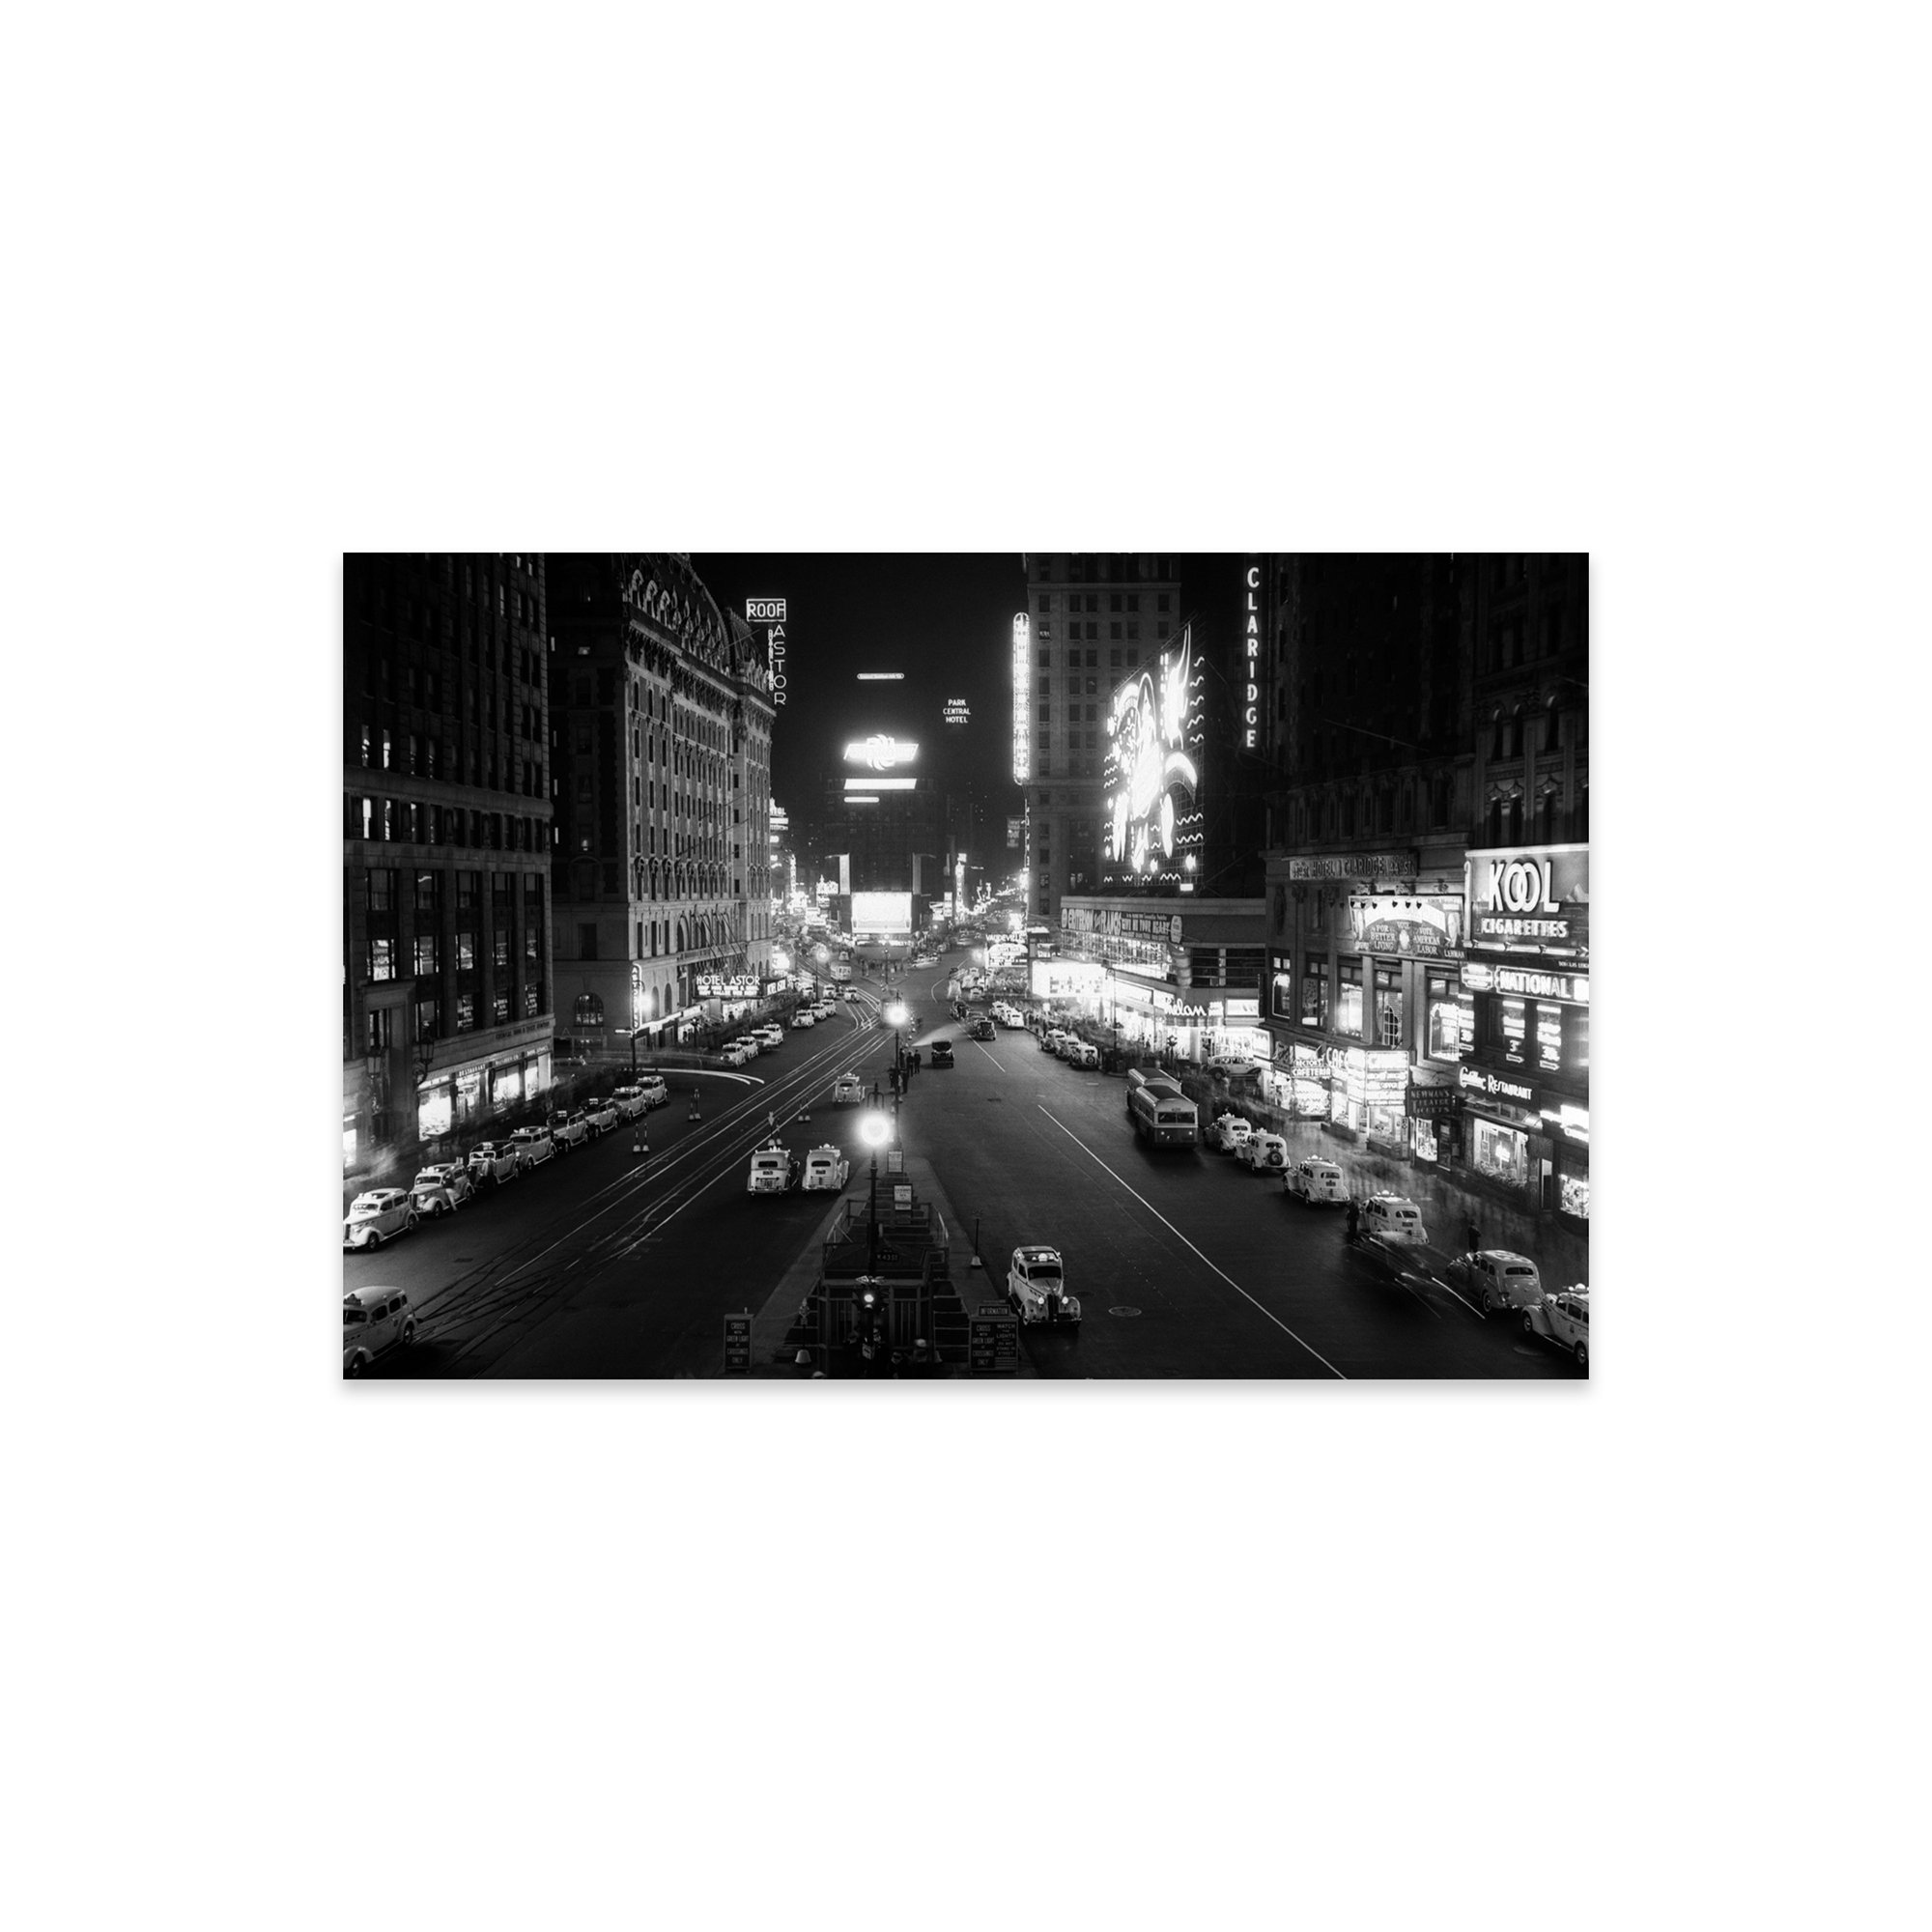 Ebern Designs 1930s Overhead Of Times Square Lit Up At Night With Cars ...